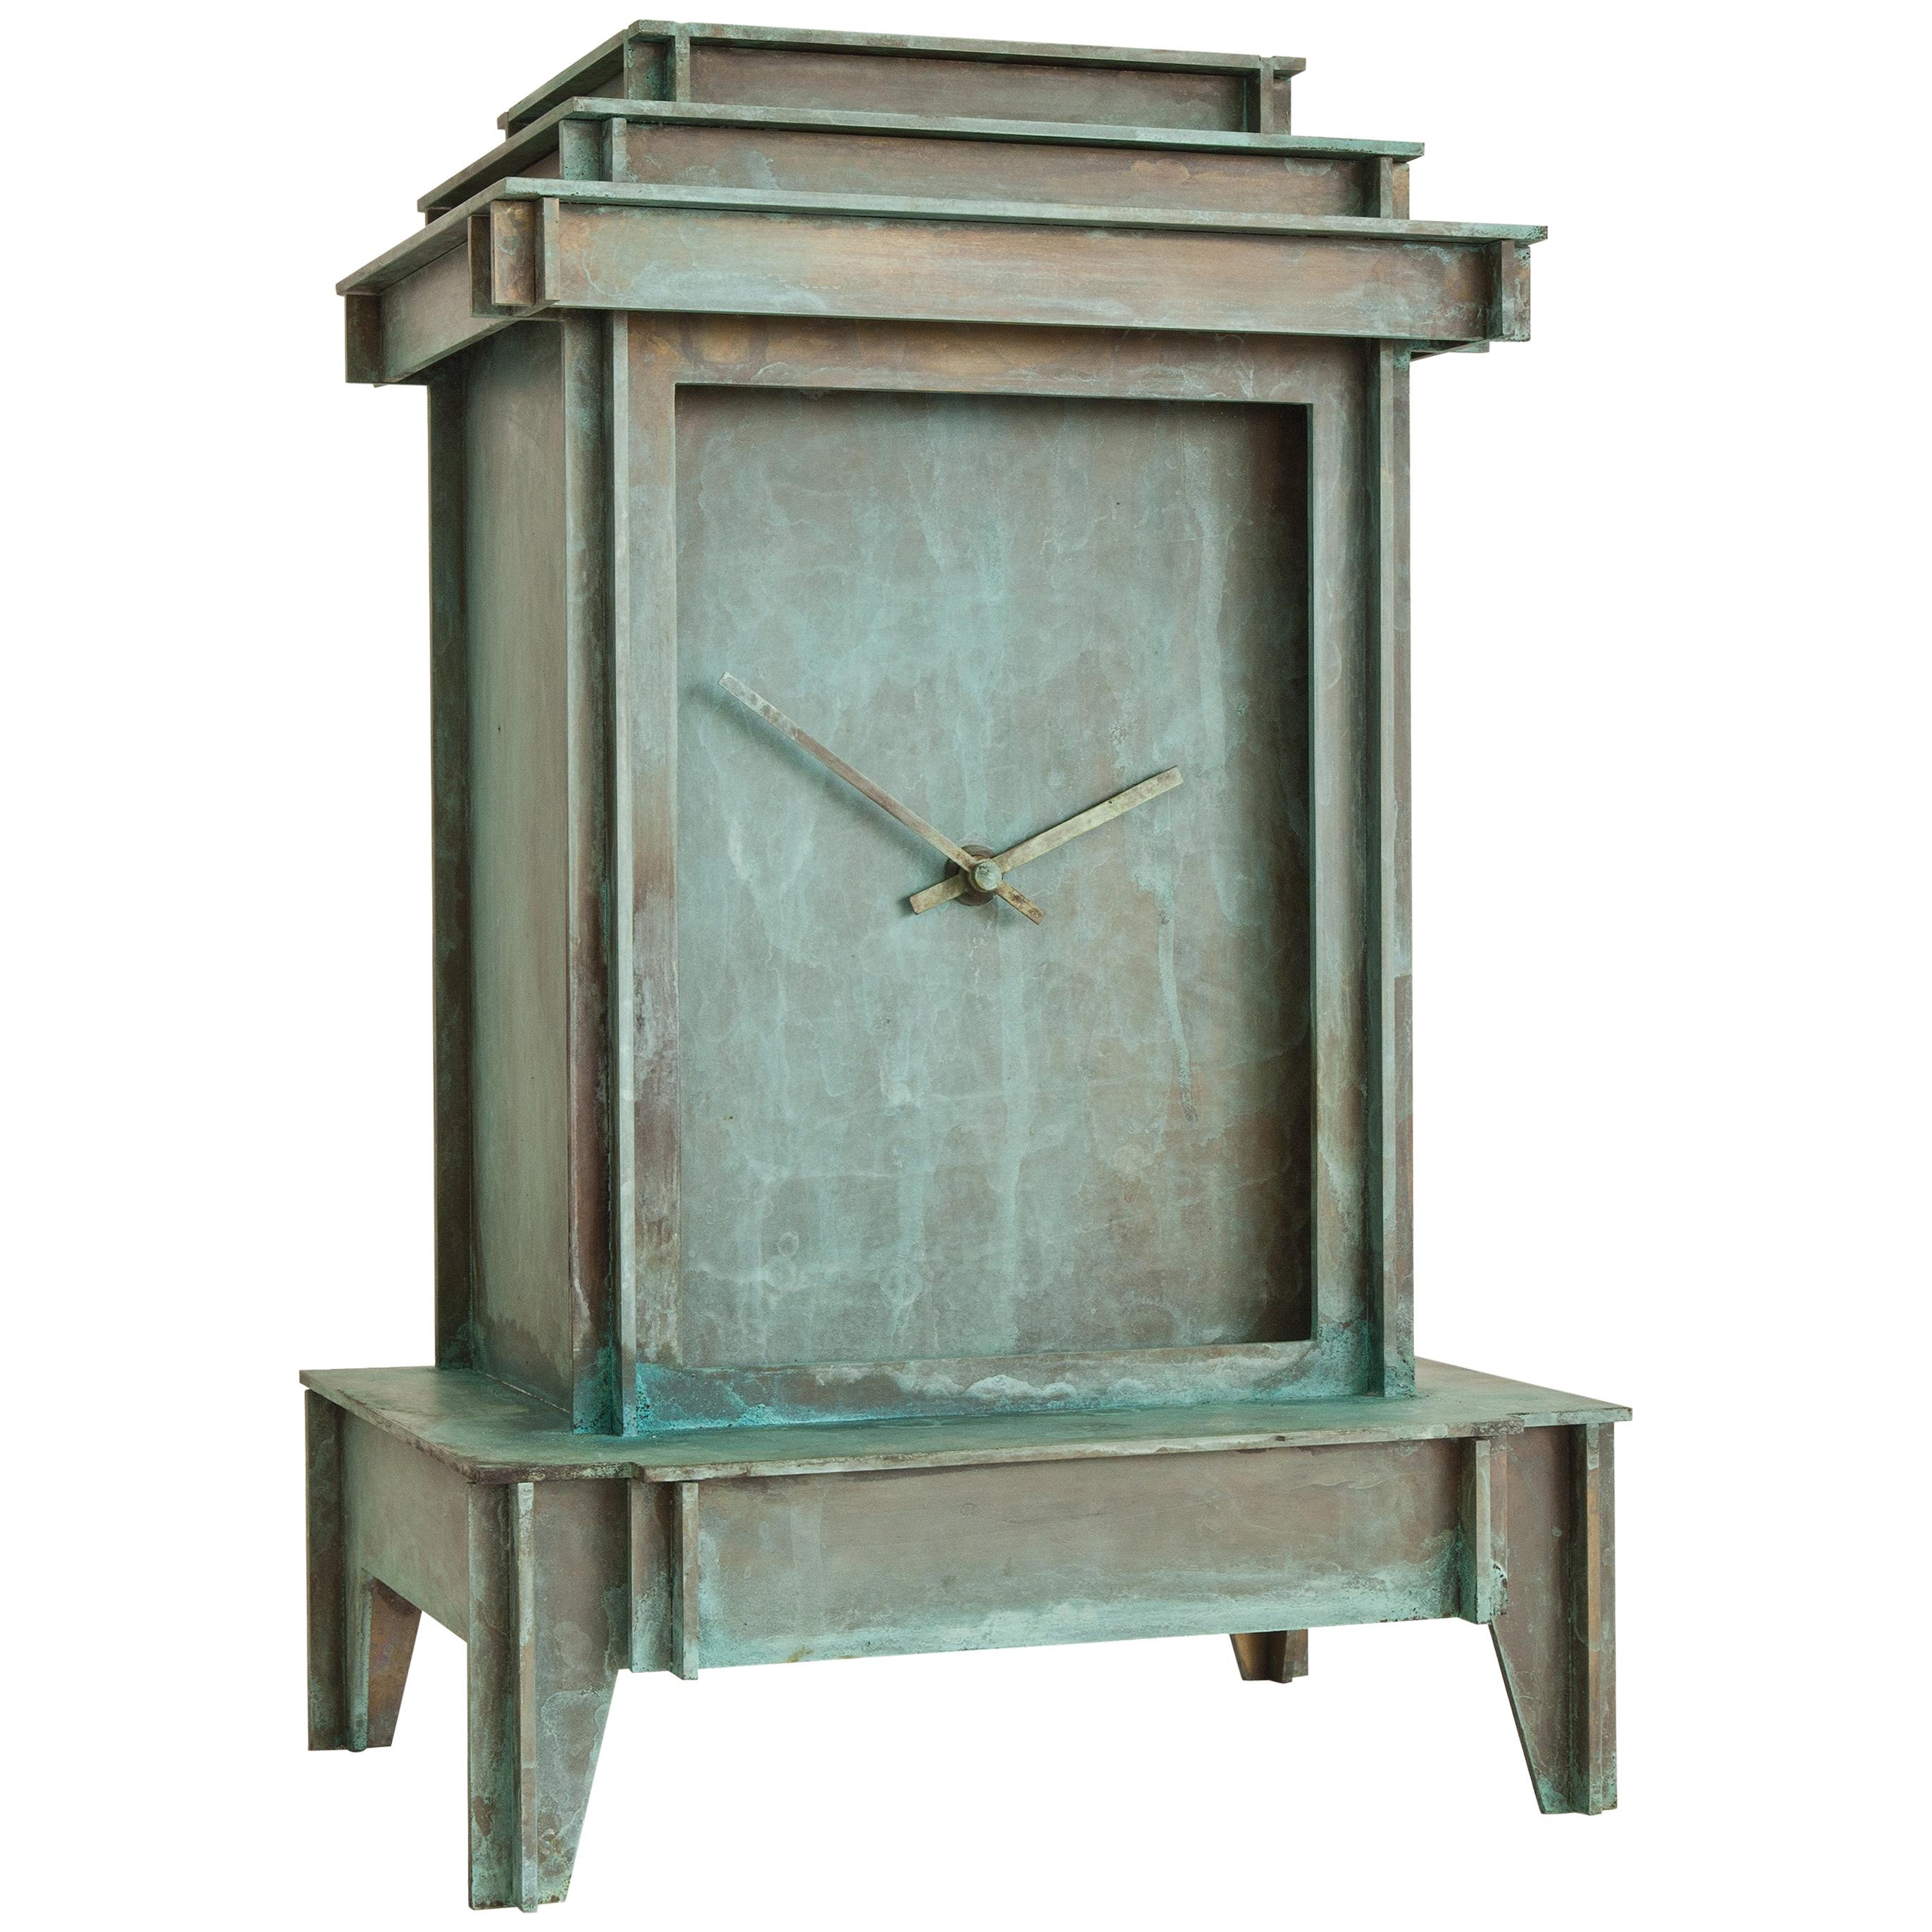 NSNG One More Time Clock Patinated Brass